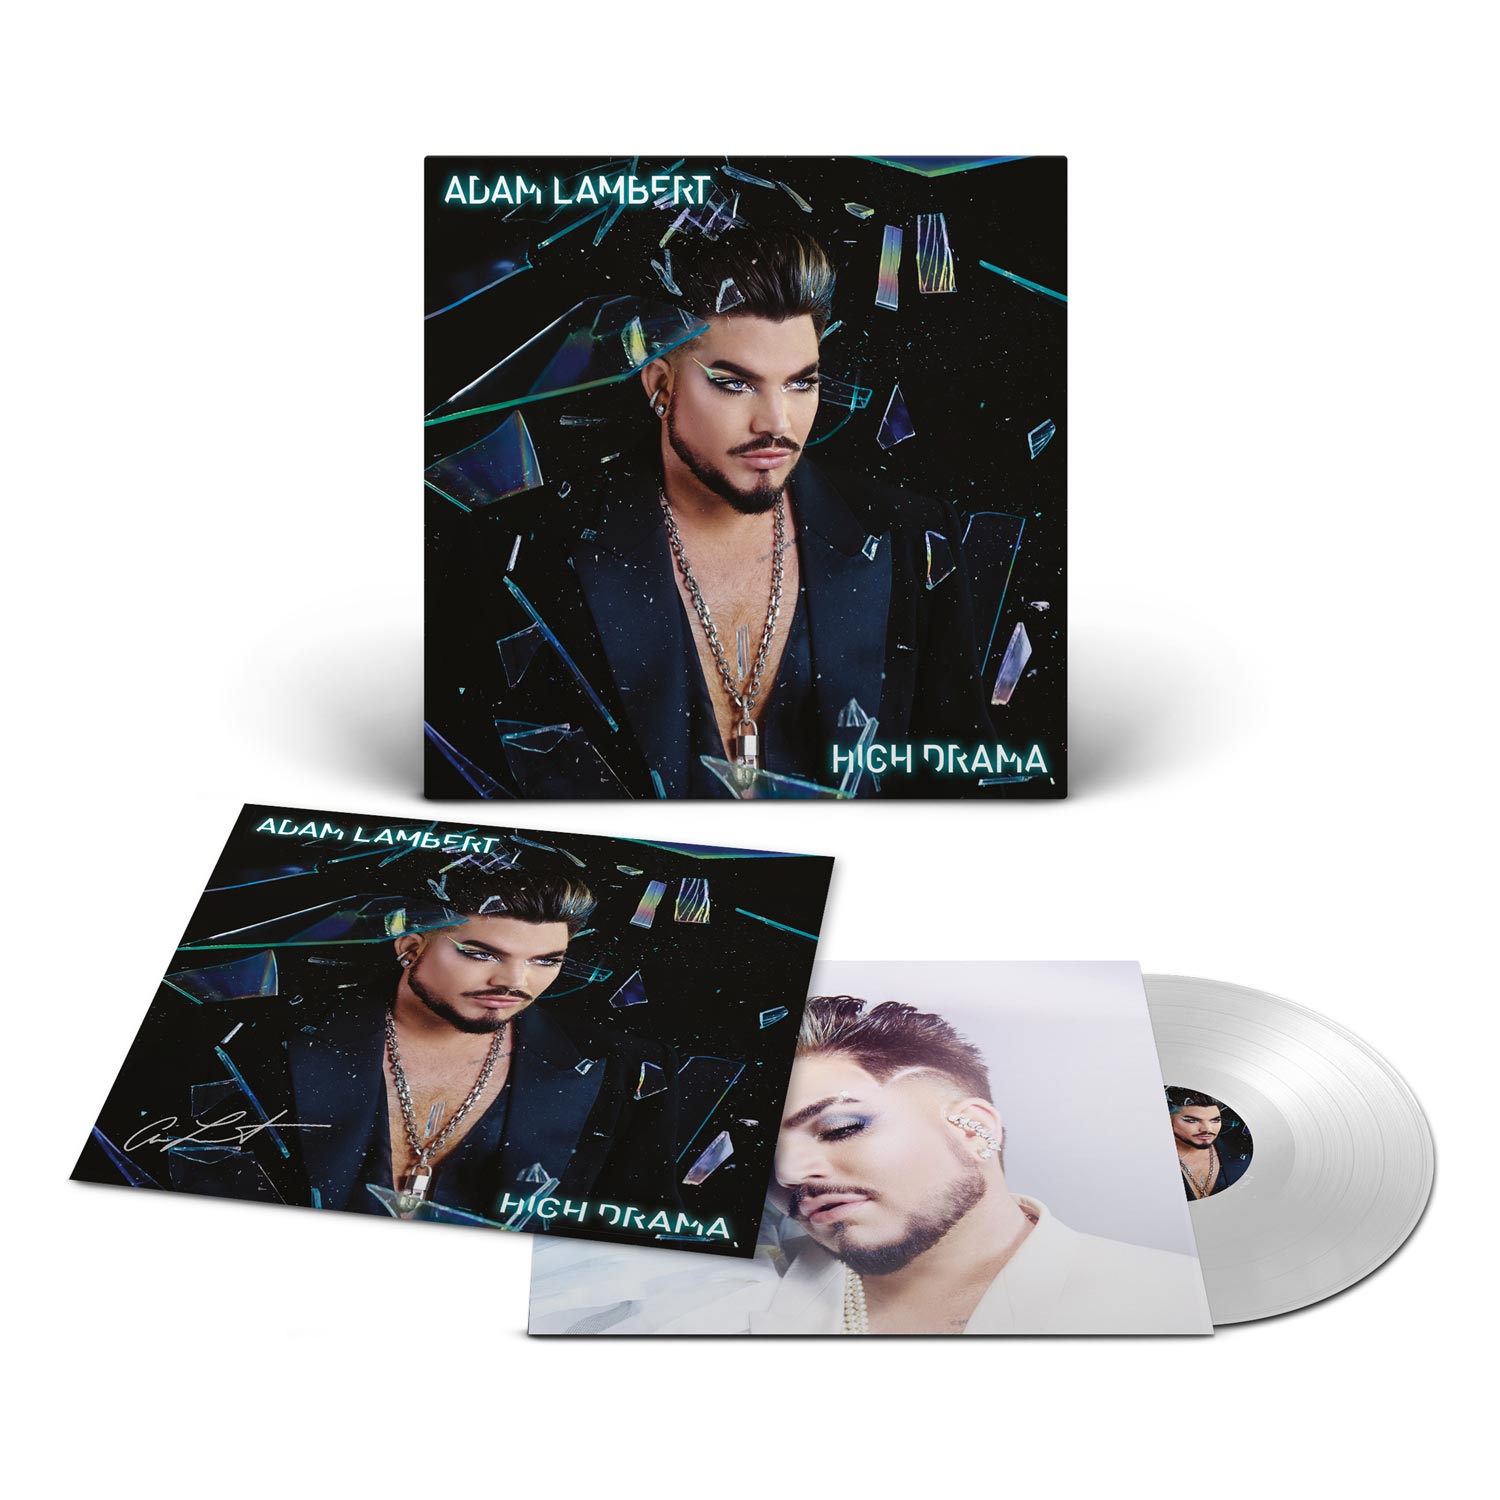 High Drama (Crystal Clear Vinyl with Signed Art Card)